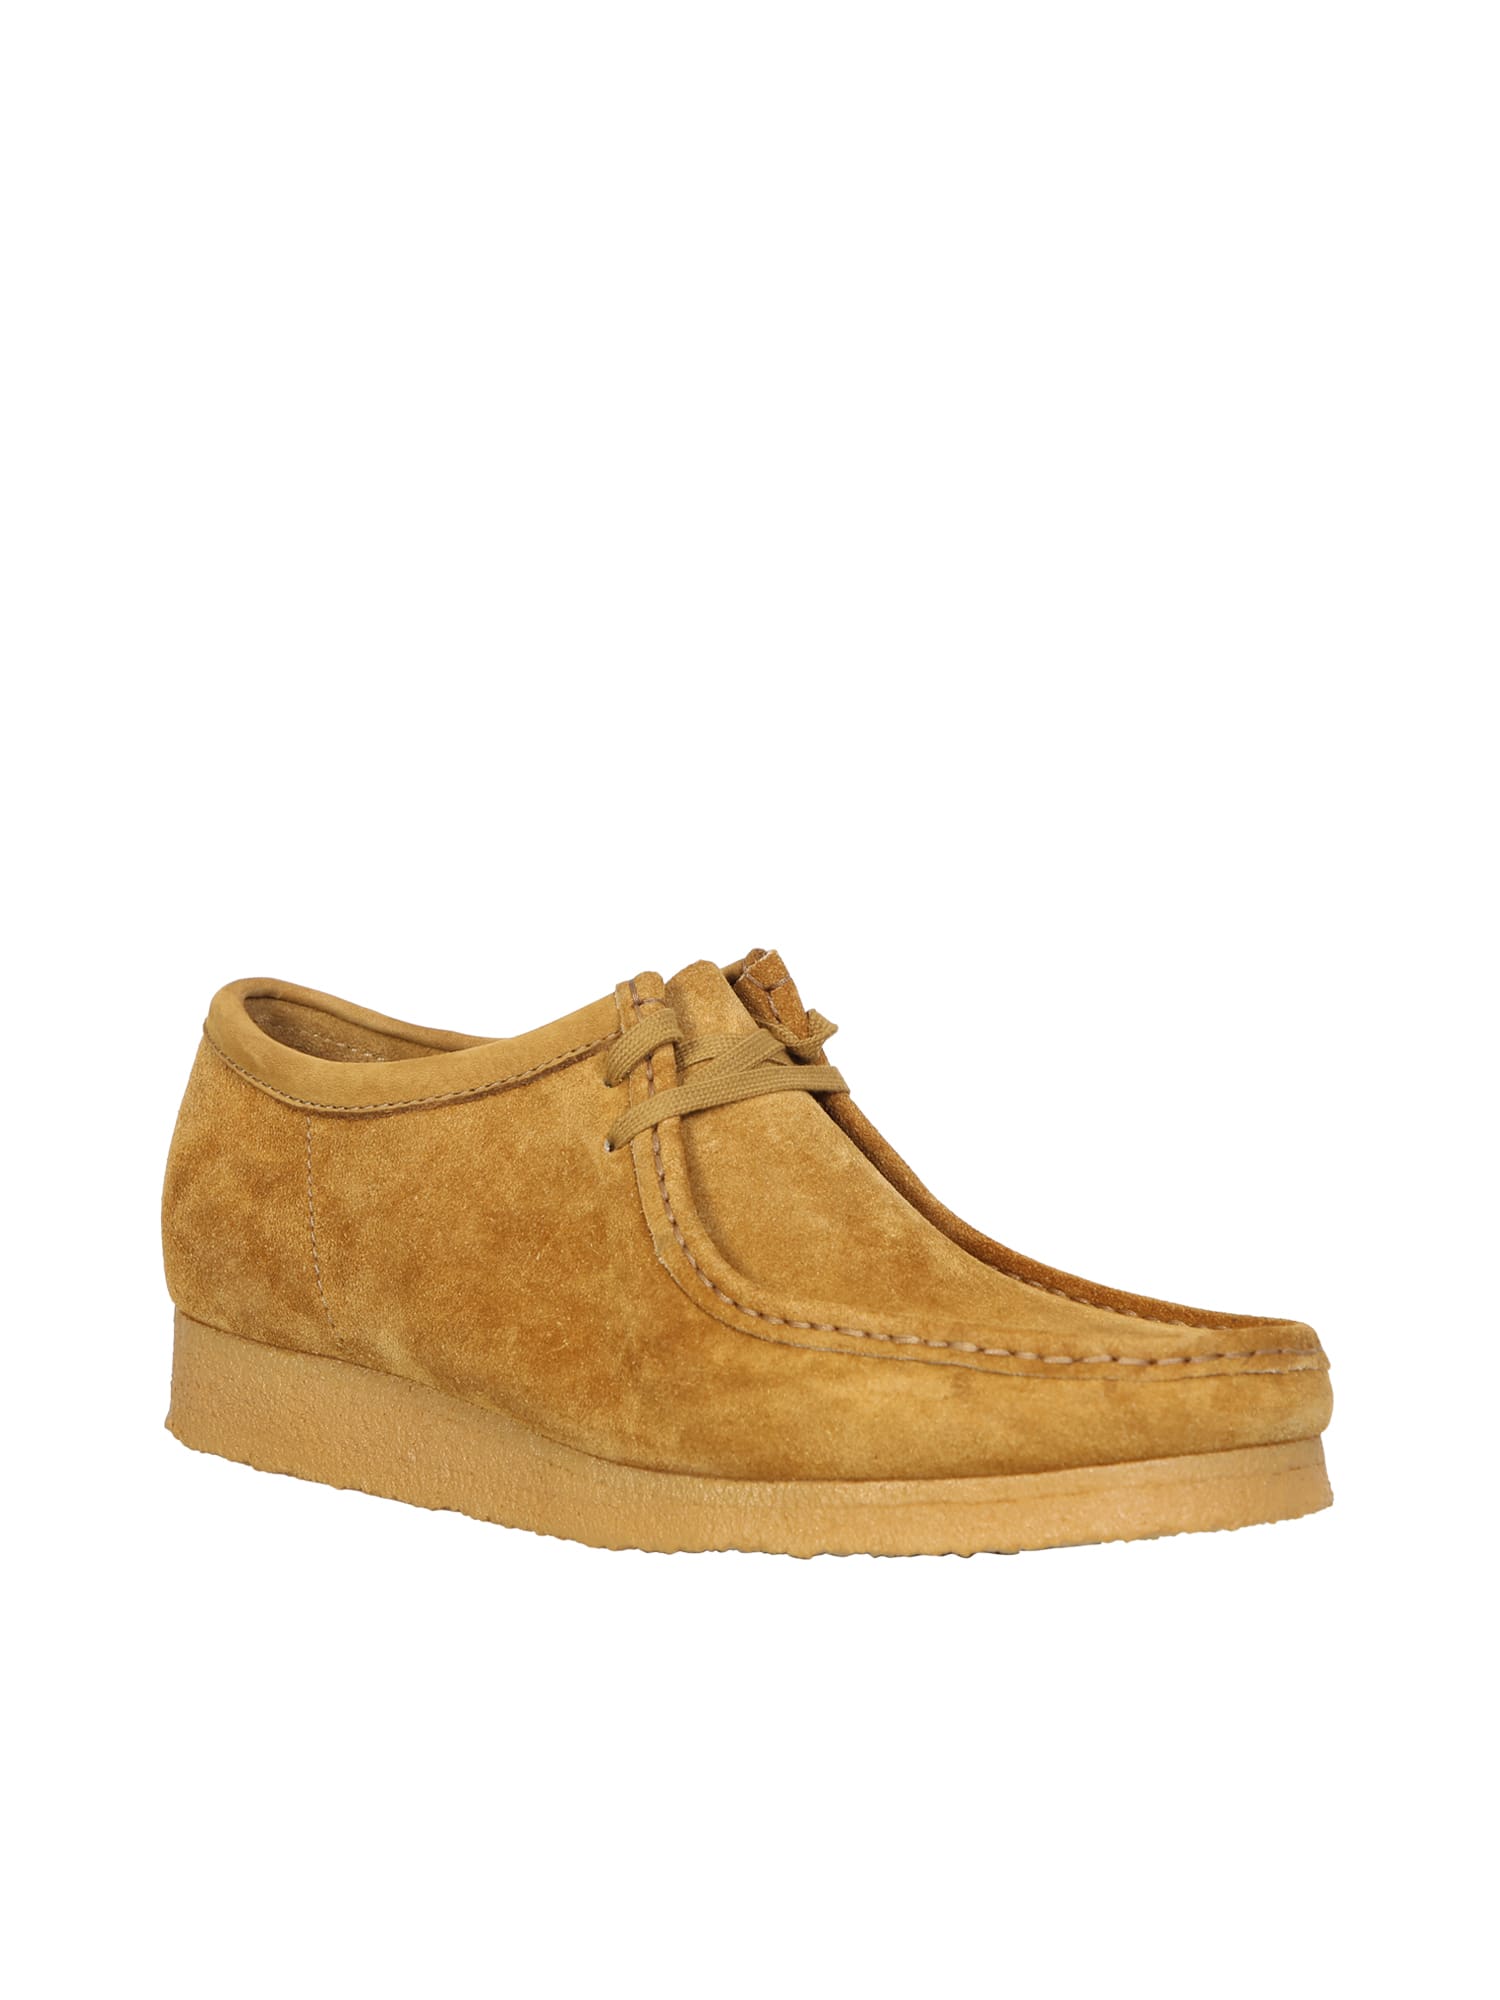 Shop Clarks Wallabee Light Brown Ankle Boots